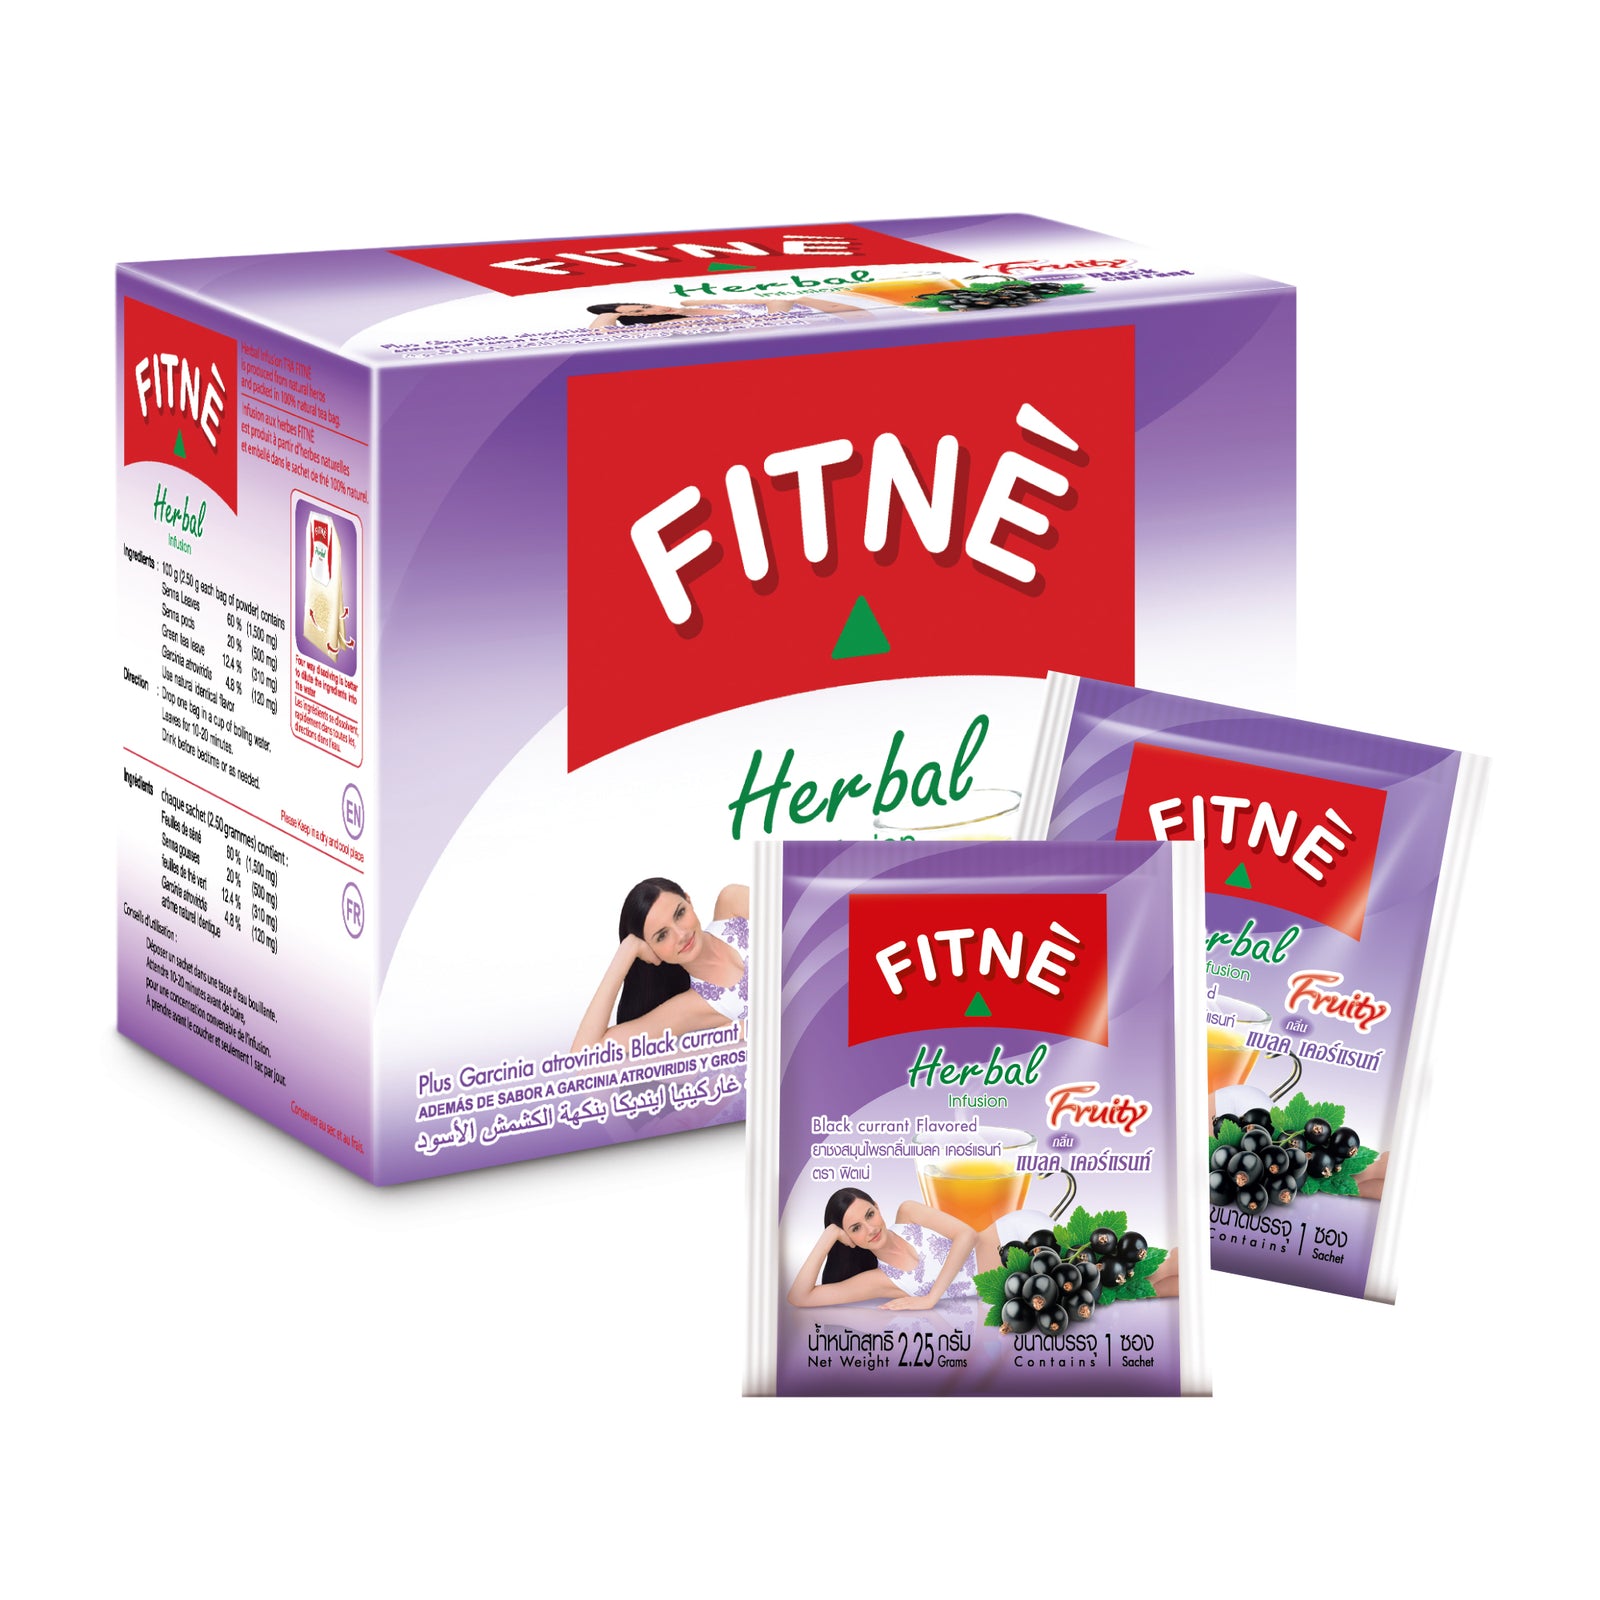 FITNE' Herbal Tea, Thailand, herbal tea, Chrysanthemum, Litchi chinensis, Herbal Infusion all Flavored by Fitne Fitné slimming coffee and detox drink  Please click:, By Thai grocery